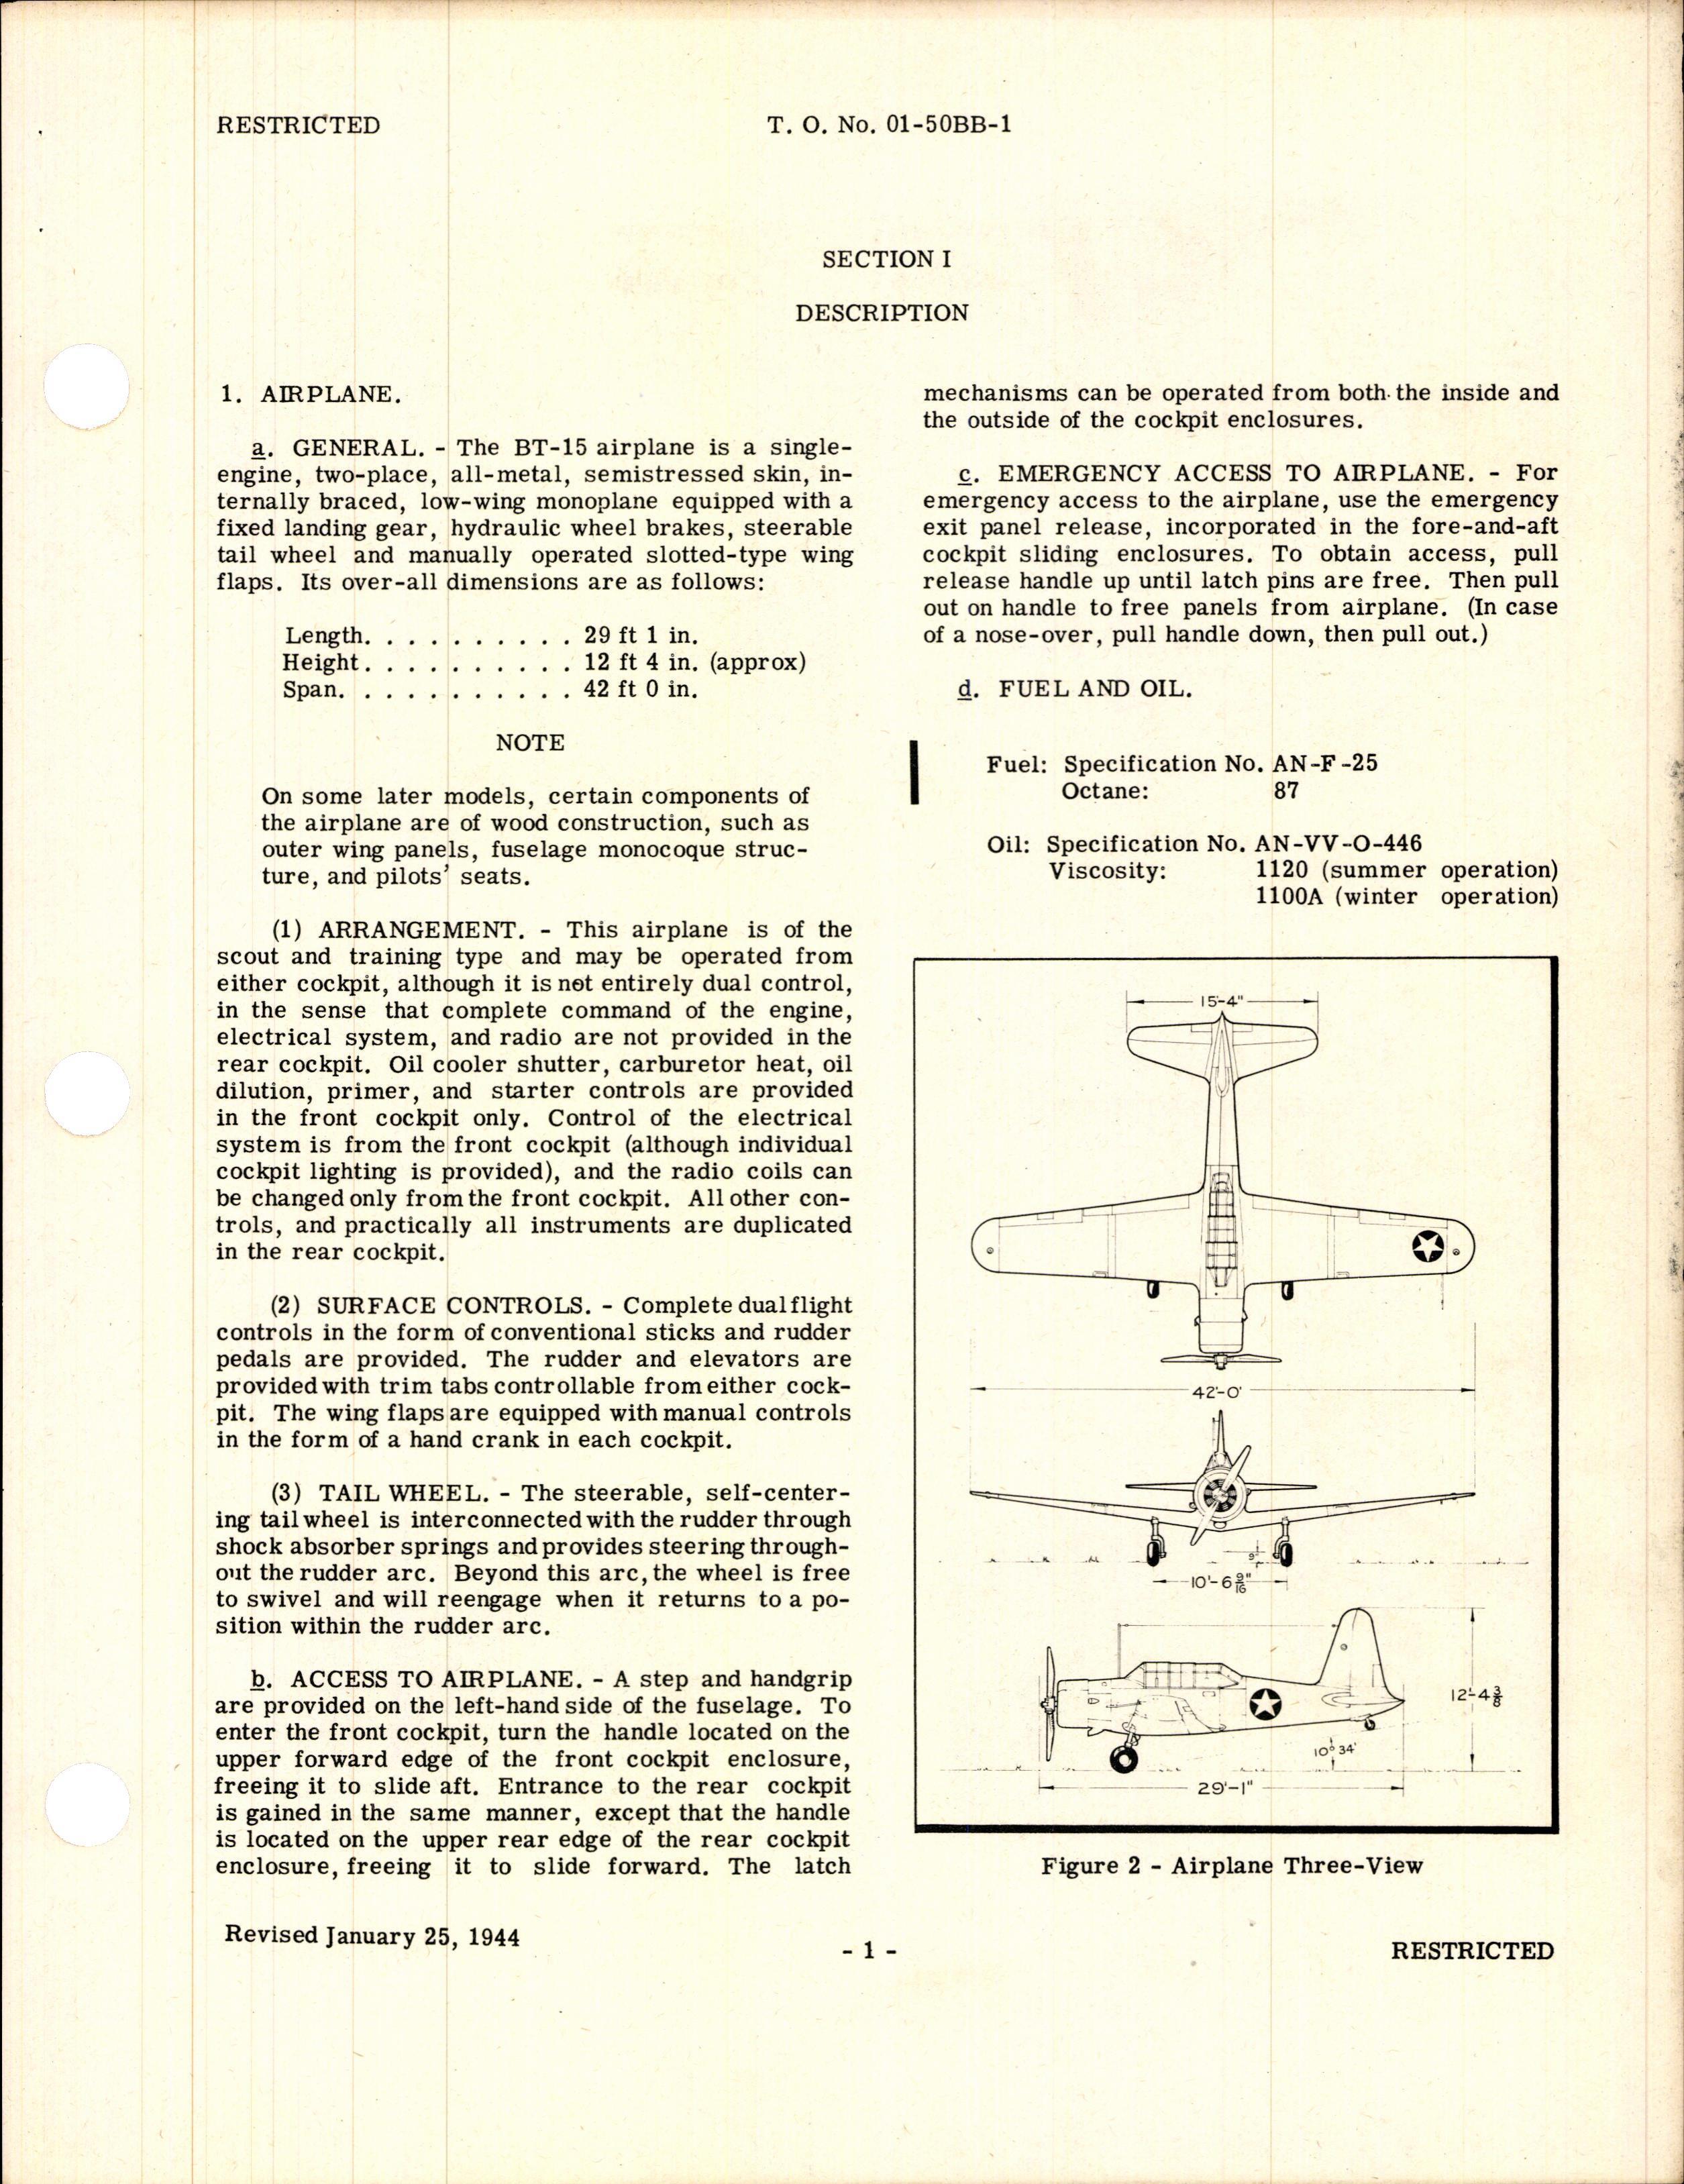 Sample page 5 from AirCorps Library document: Pilot's Flight Operating Instructions for Army Model BT-15 Airplanes